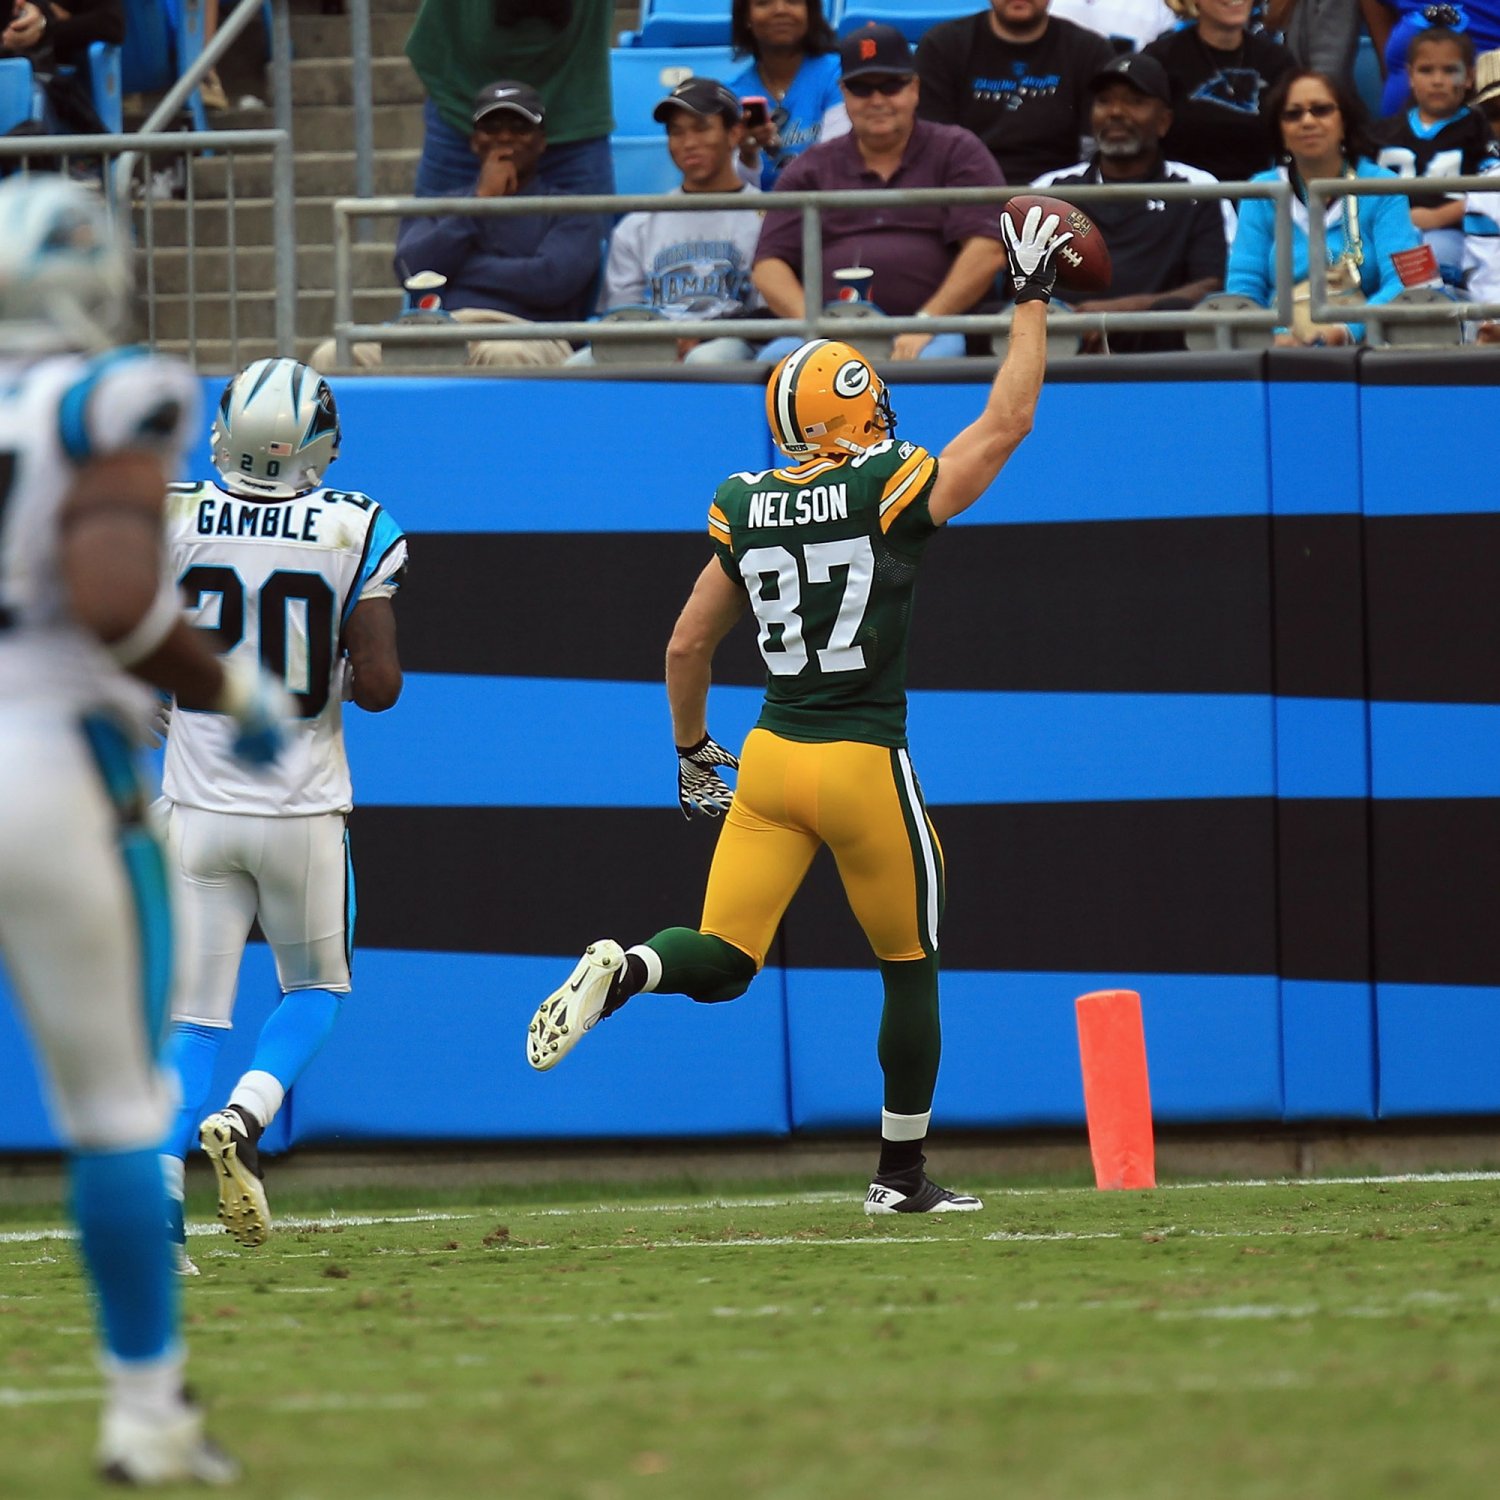 Carolina Panthers vs. Green Bay Packers Live Score and Analysis for